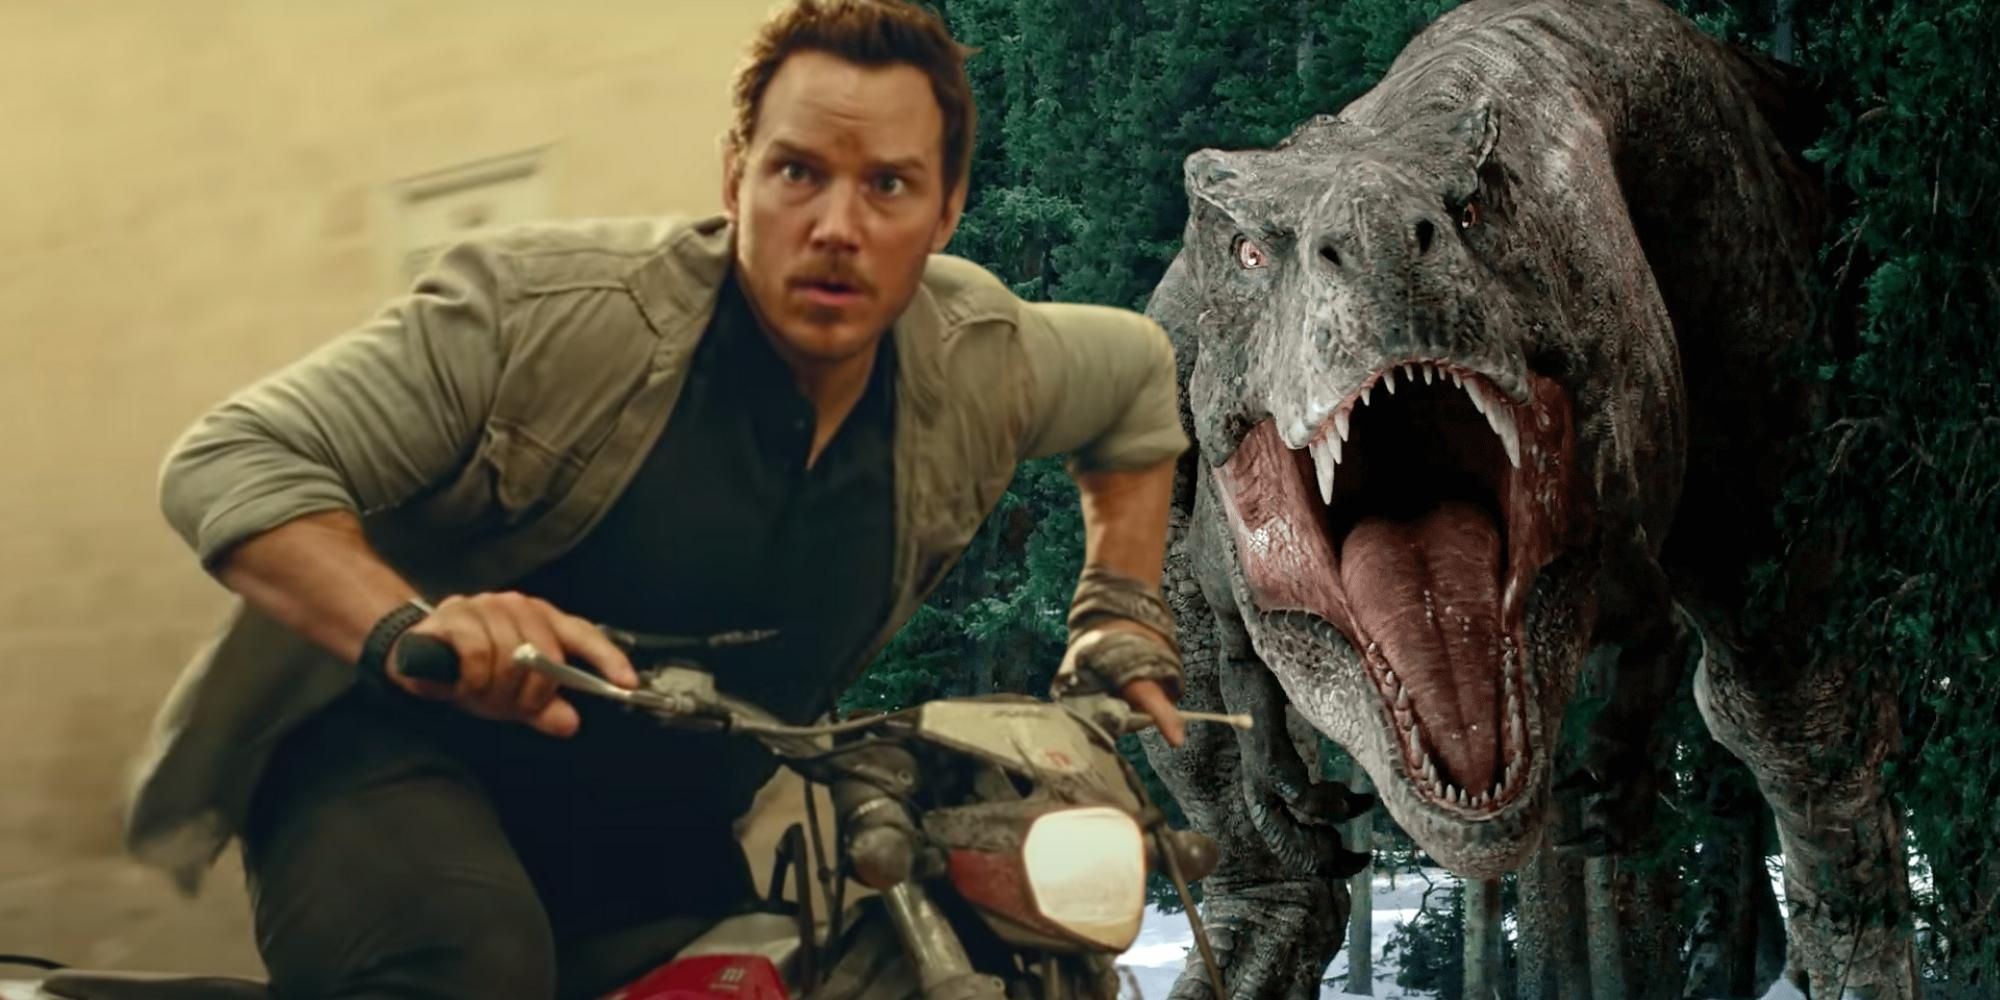 Jurassic World Dominion action shots of Chris Pratt riding a motorcycle and the T-Rex hunting.